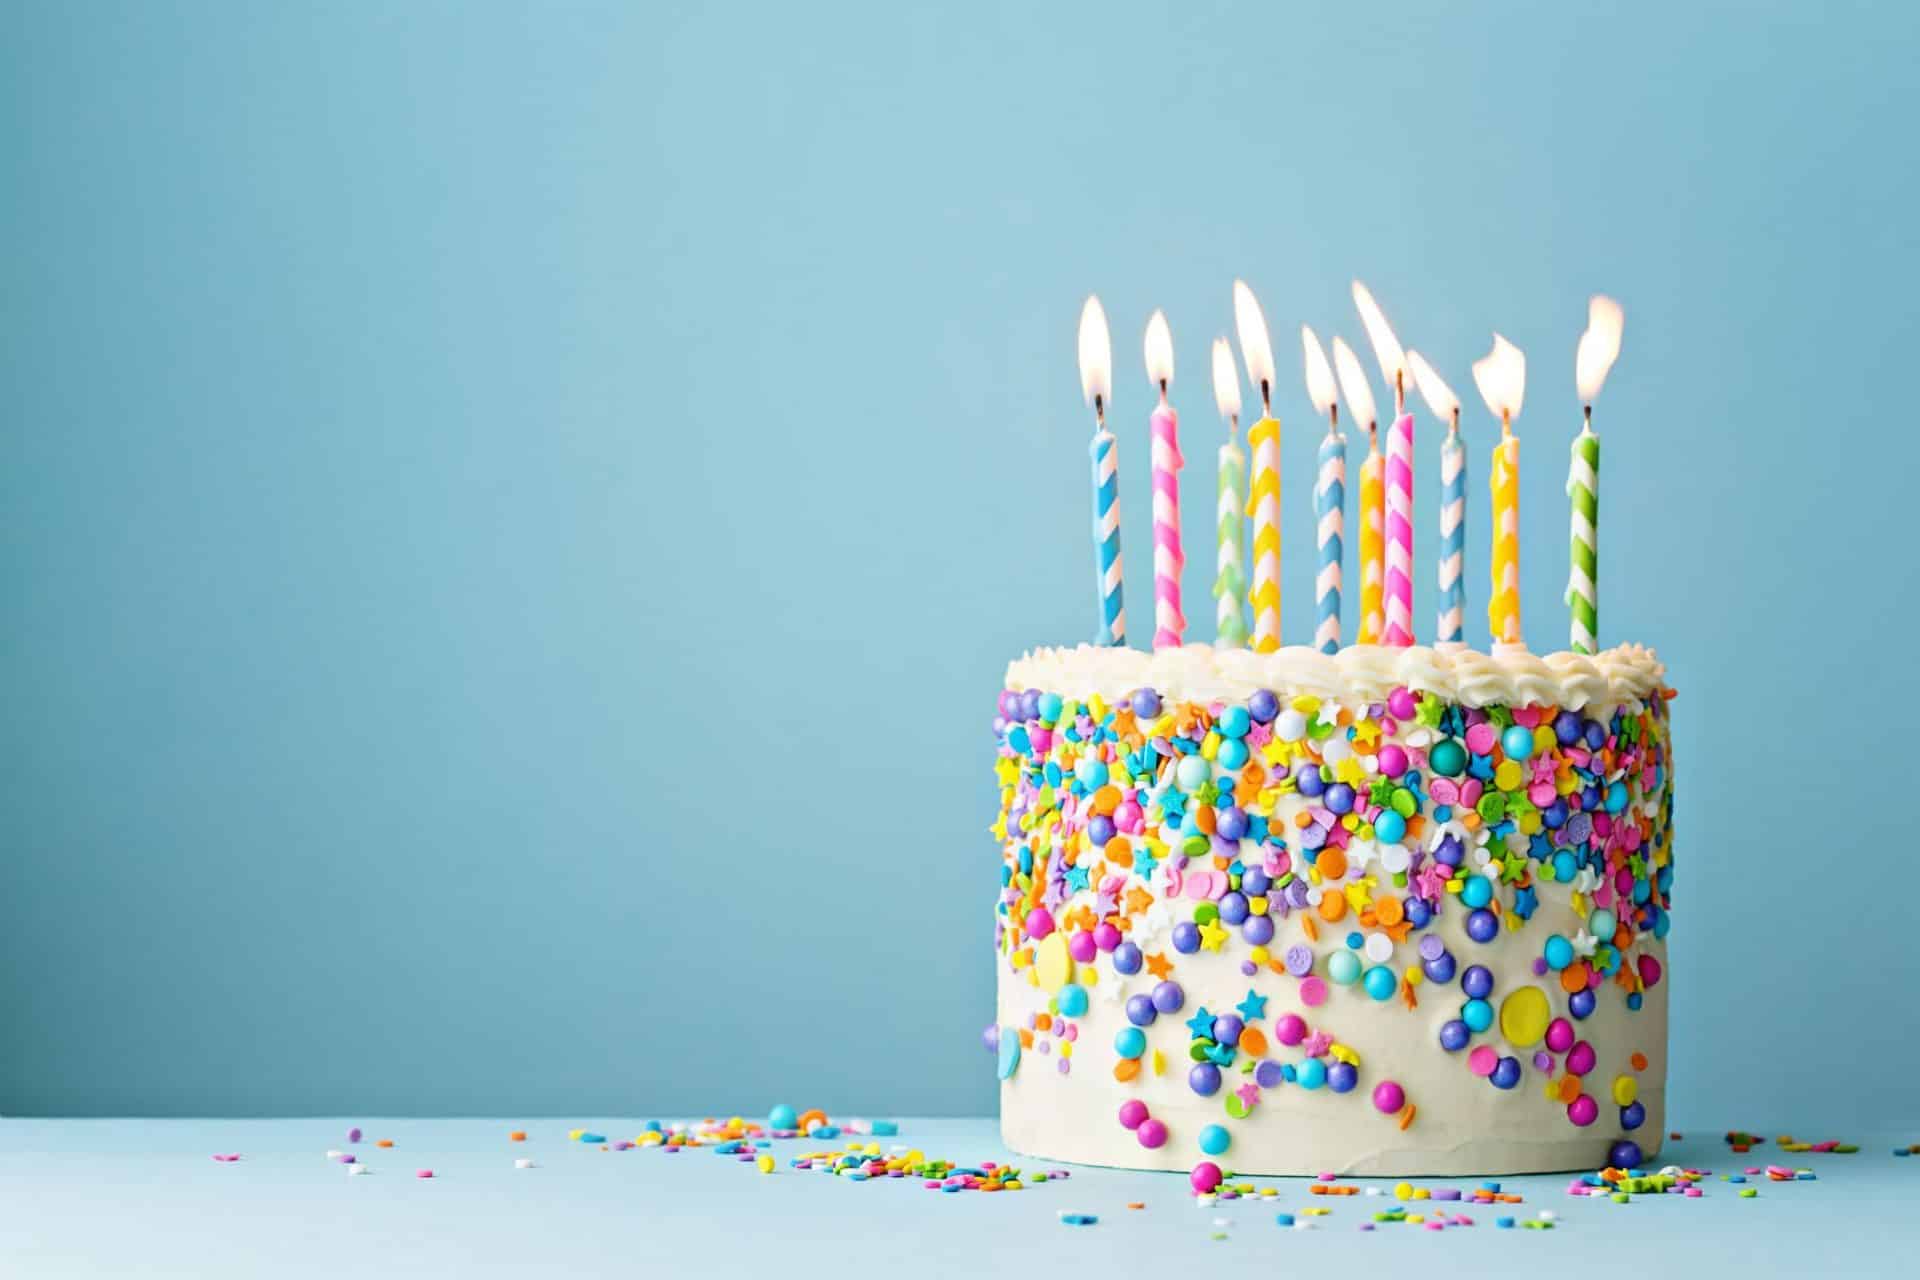 5 FREE ACTIVITIES TO DO FOR YOUR BIRTHDAY